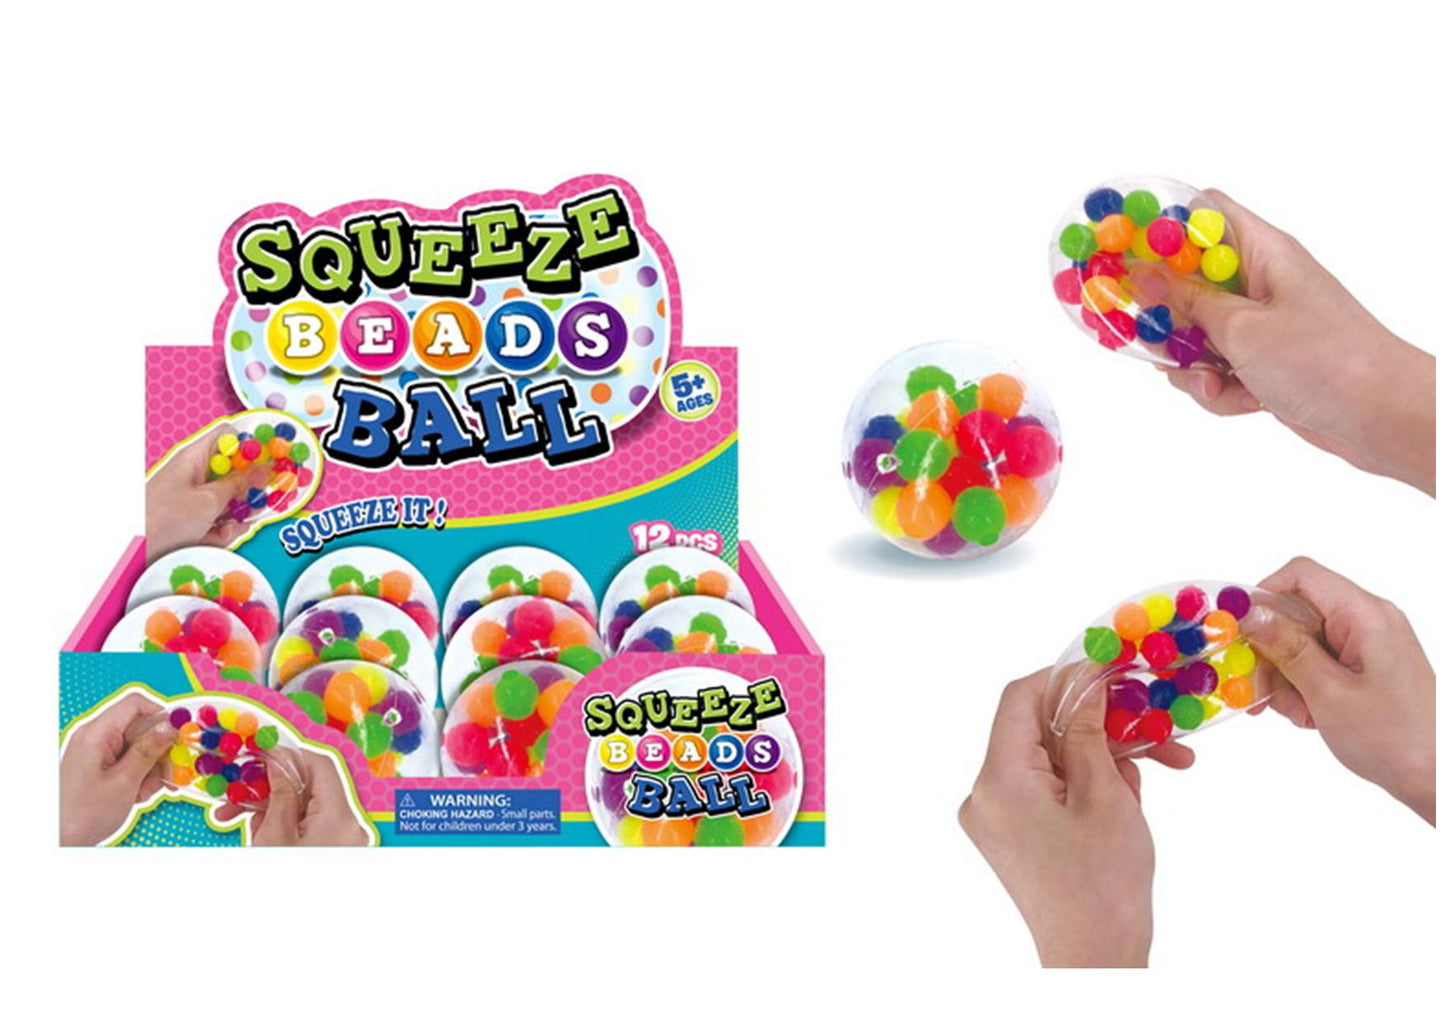 Squeeze Beads Ball (7128329289927)